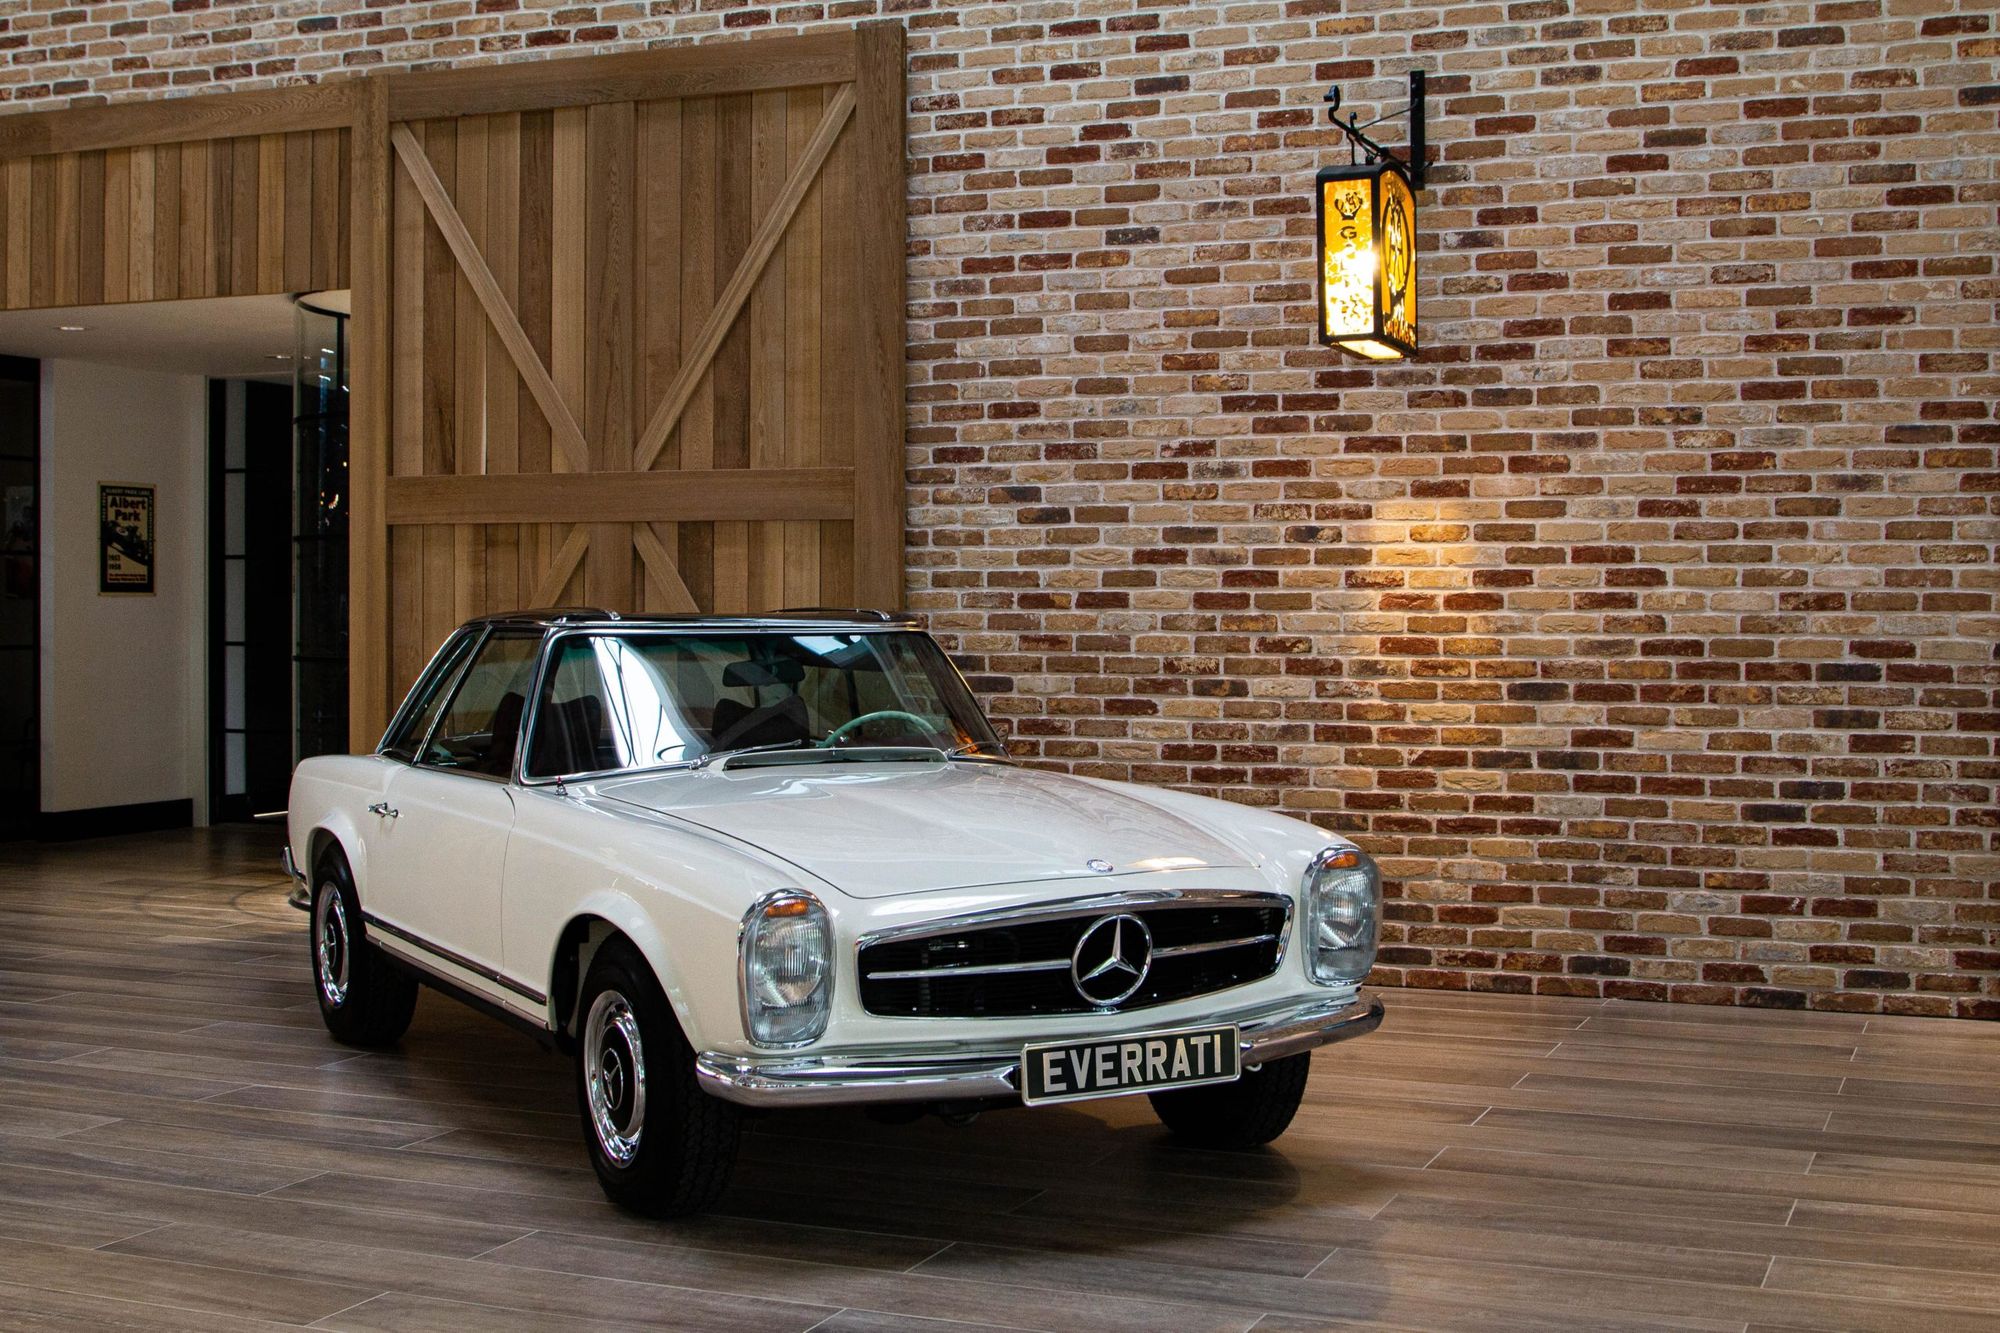 Hilton & Moss partner with Everrati to restore and electrify Iconic Mercedes-Benz